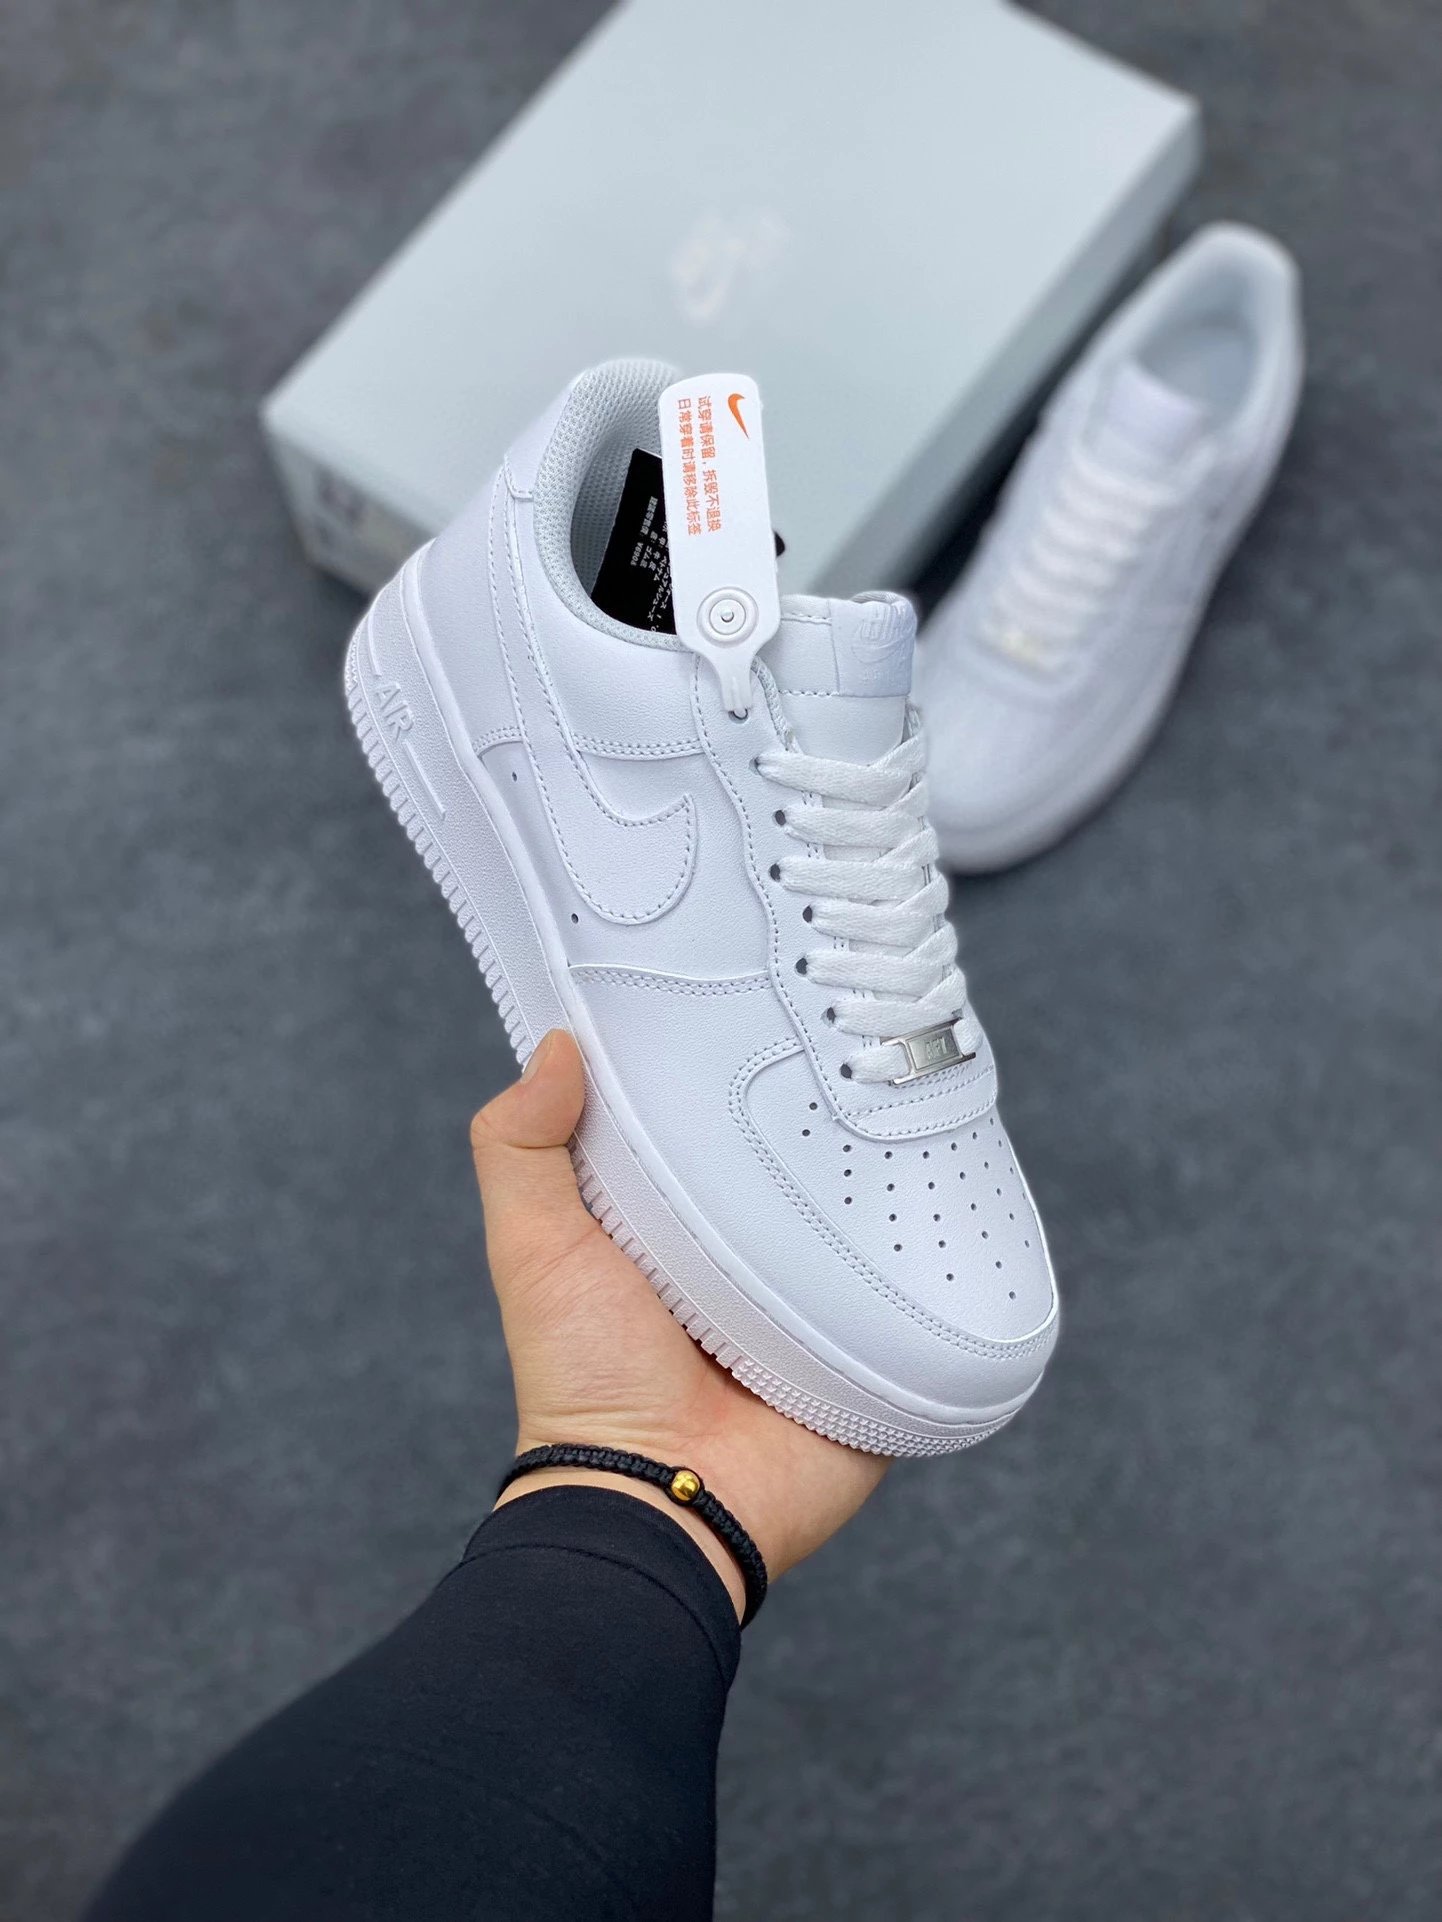 Item Thumbnail for N1KE A1R FORCE 1 Air Force One AF1 All-White Low-Top Sneakers Exclusive Stock 35.5-47